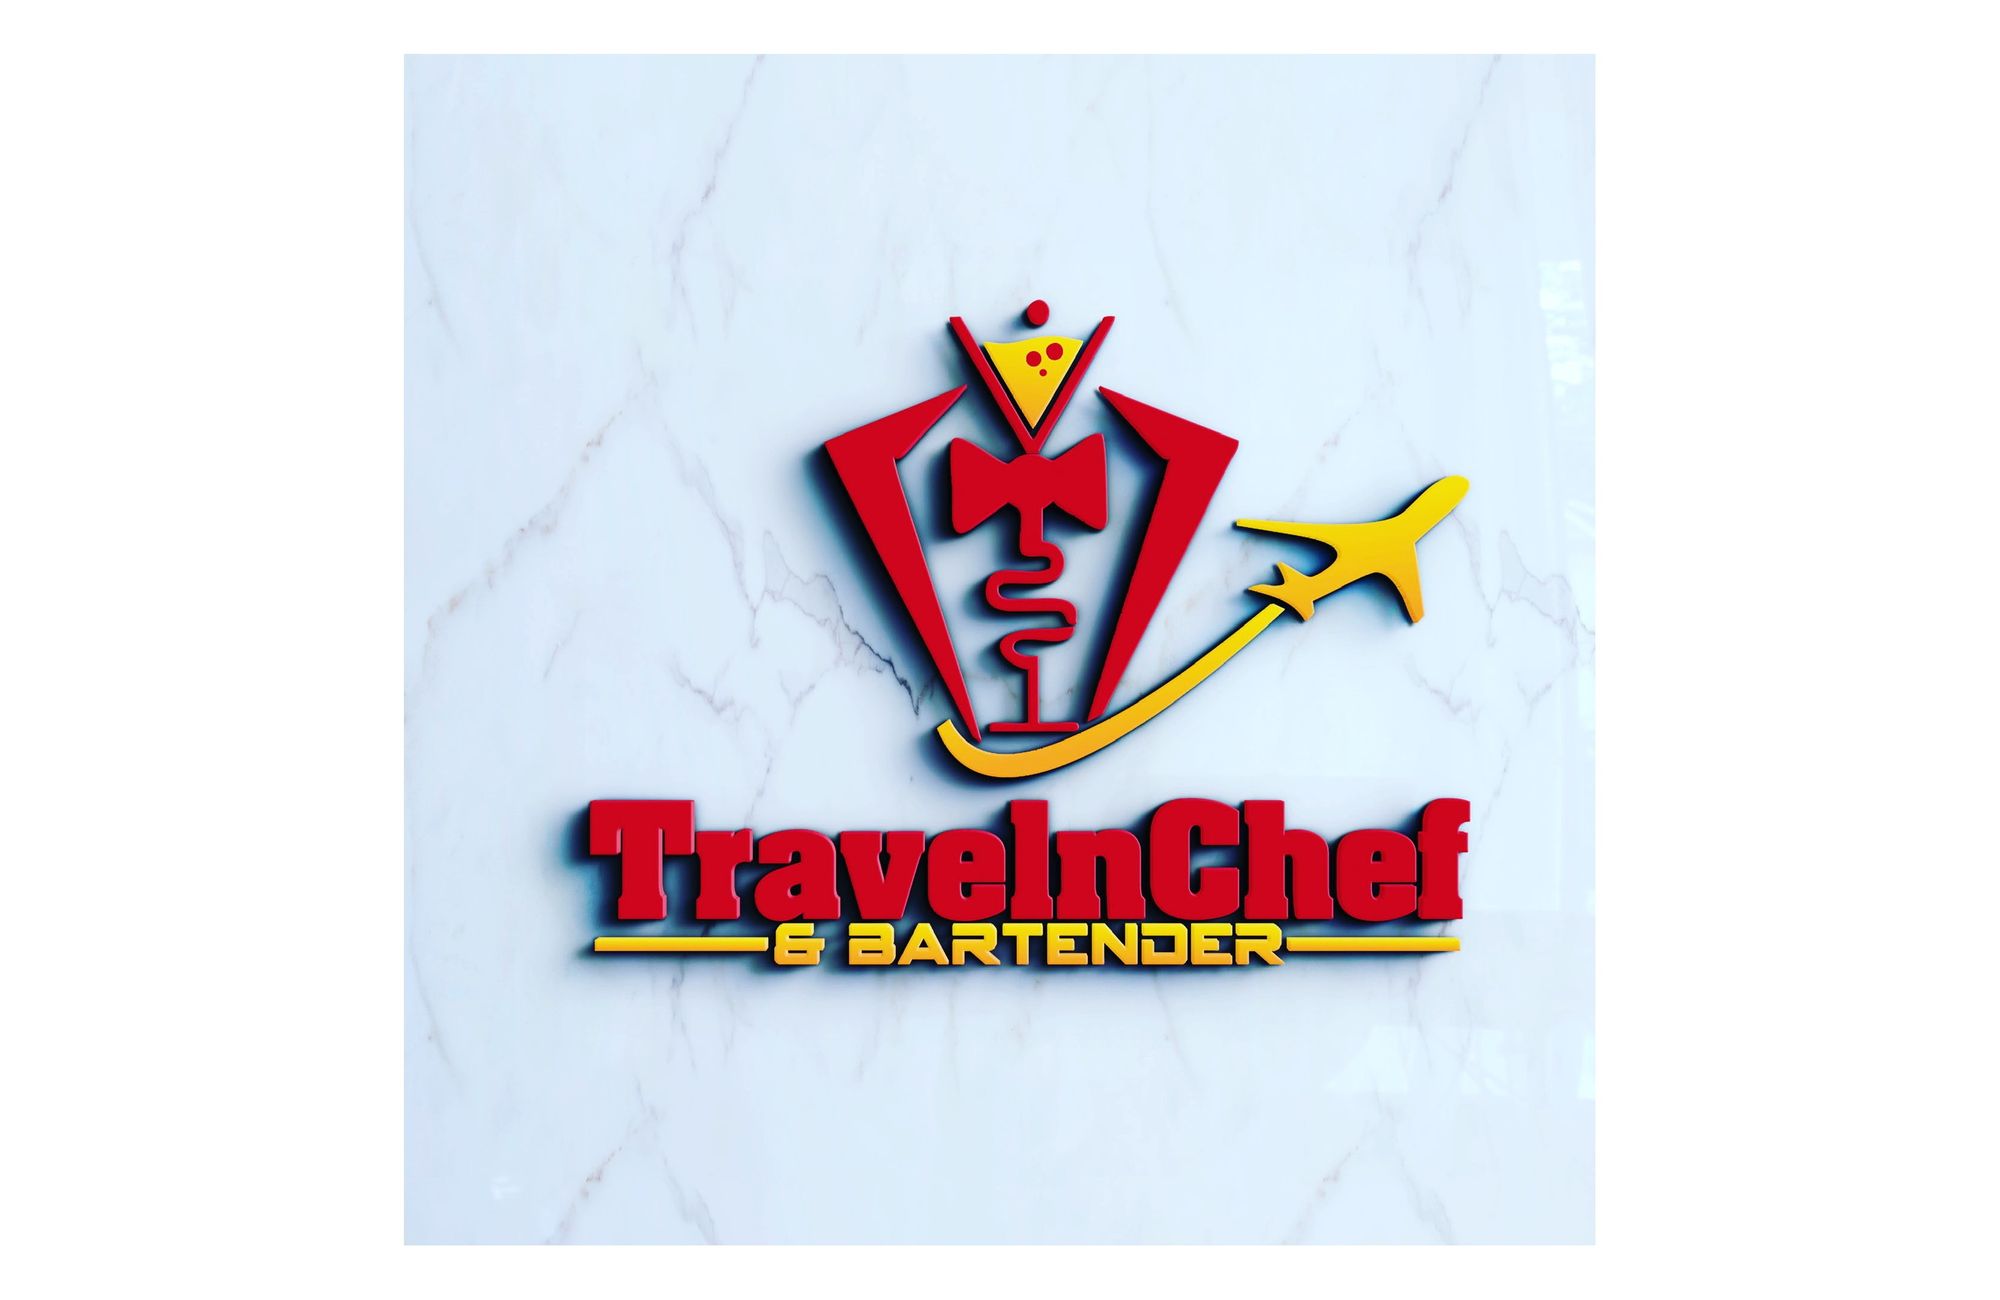 The Ultimate Experience - TravelnChef & Bartender